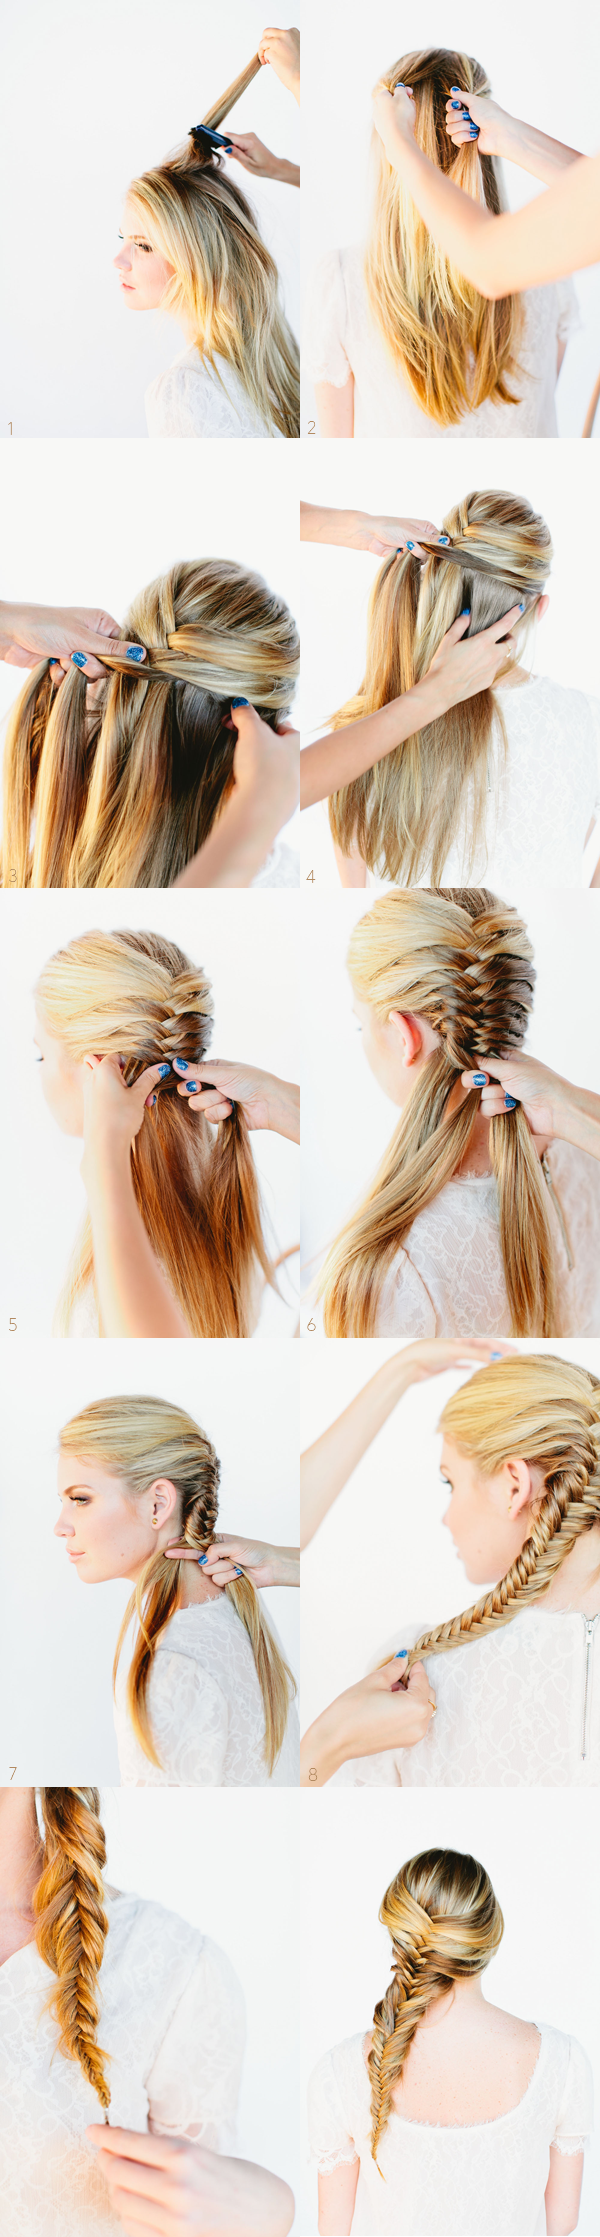 12 Romantic Braided Hairstyles With Useful Tutorials - Pretty Designs